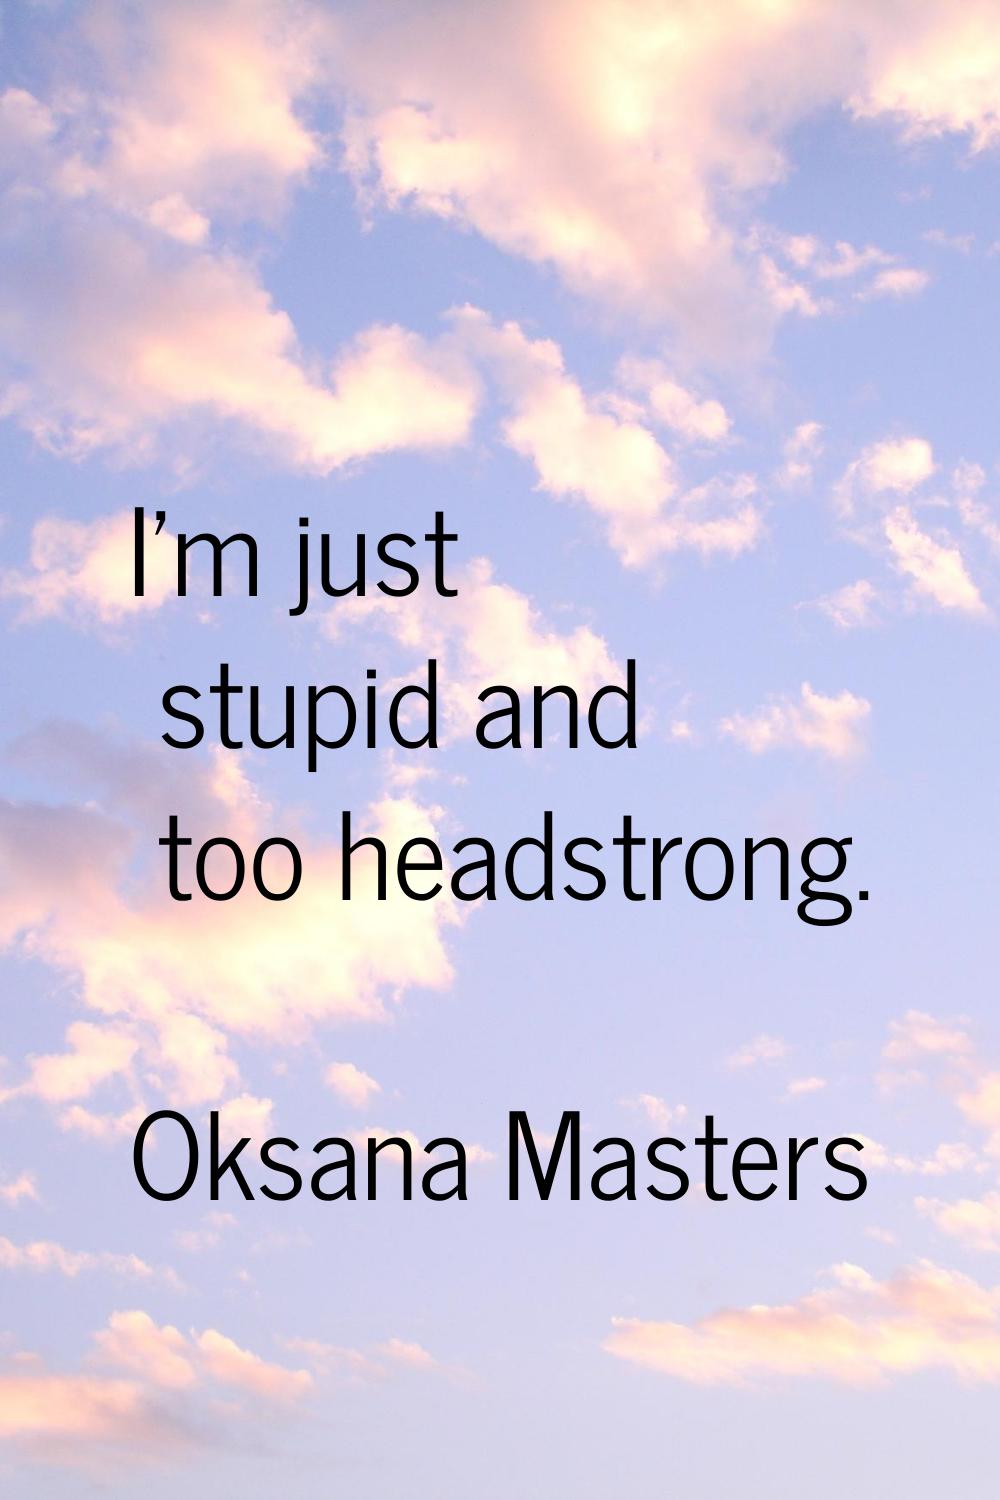 I'm just stupid and too headstrong.